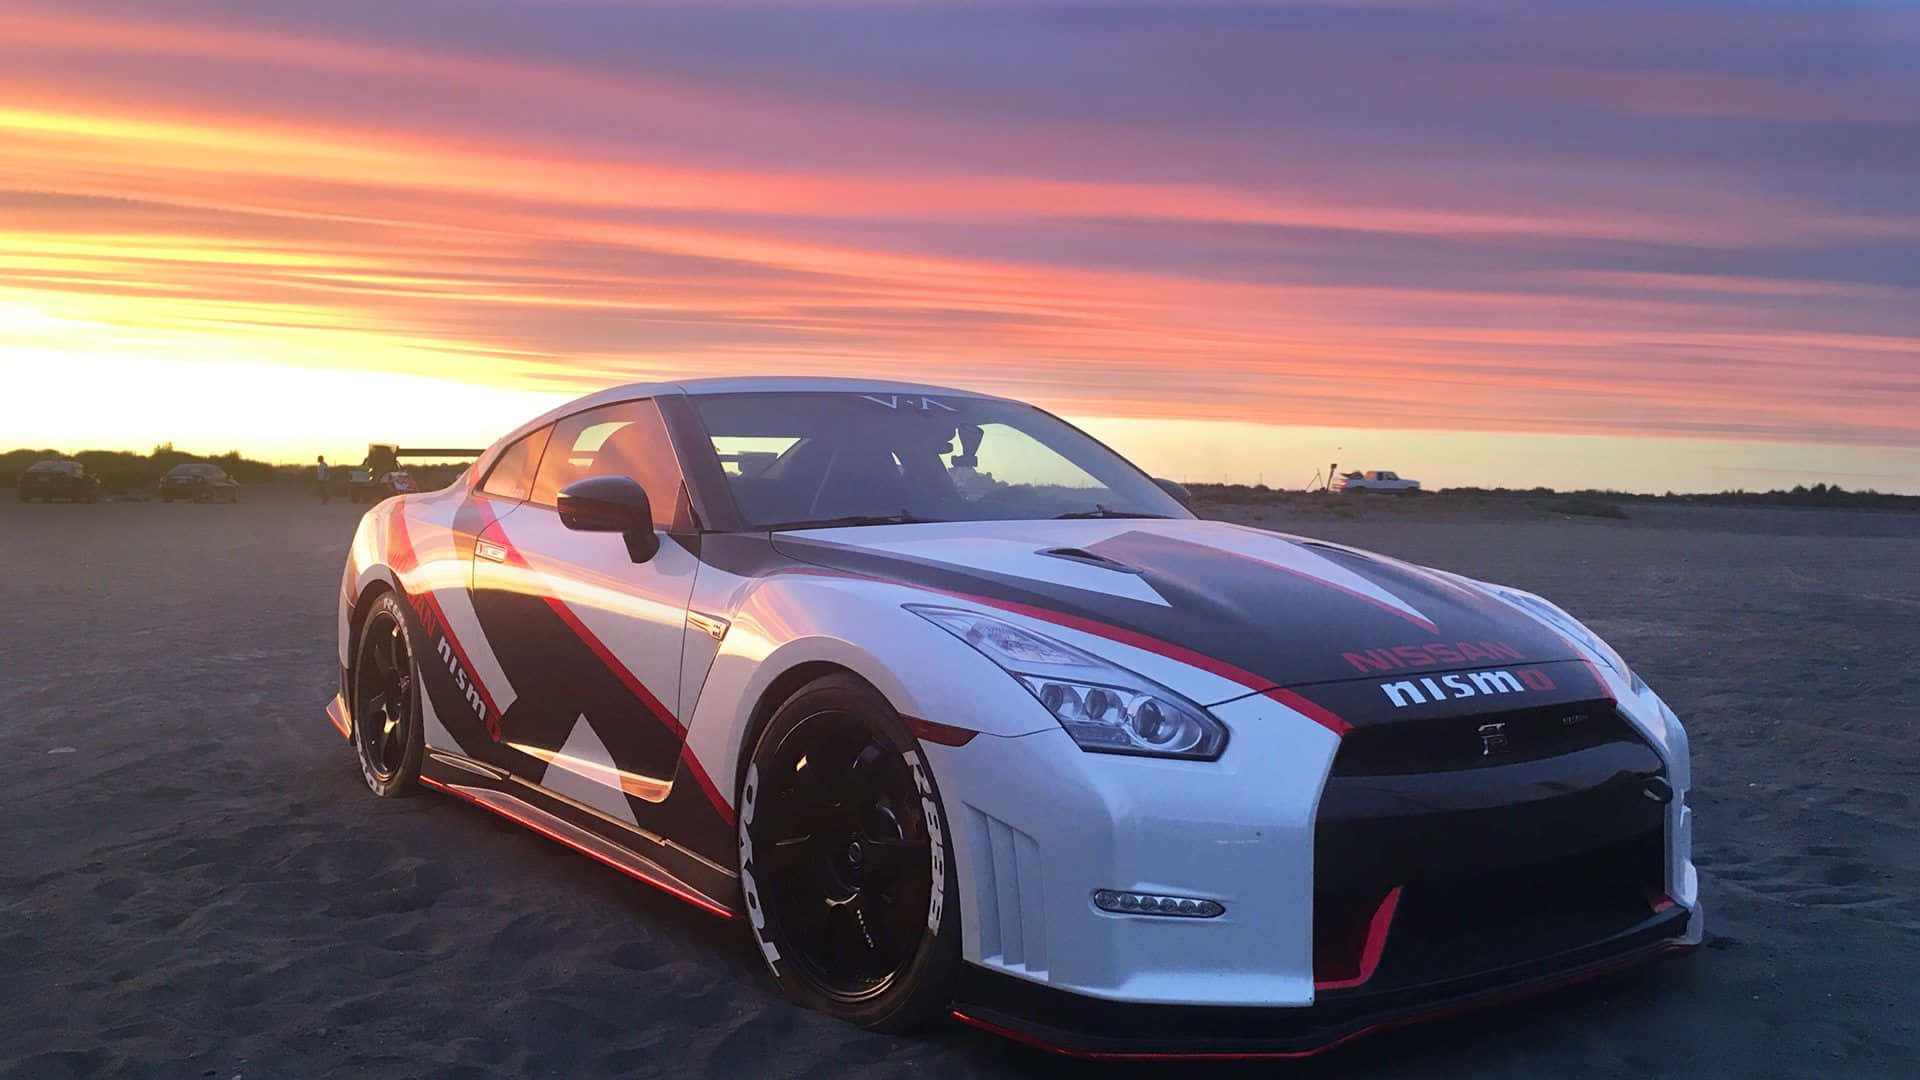 A Nissan Gtr Parked On The Beach At Sunset Wallpaper